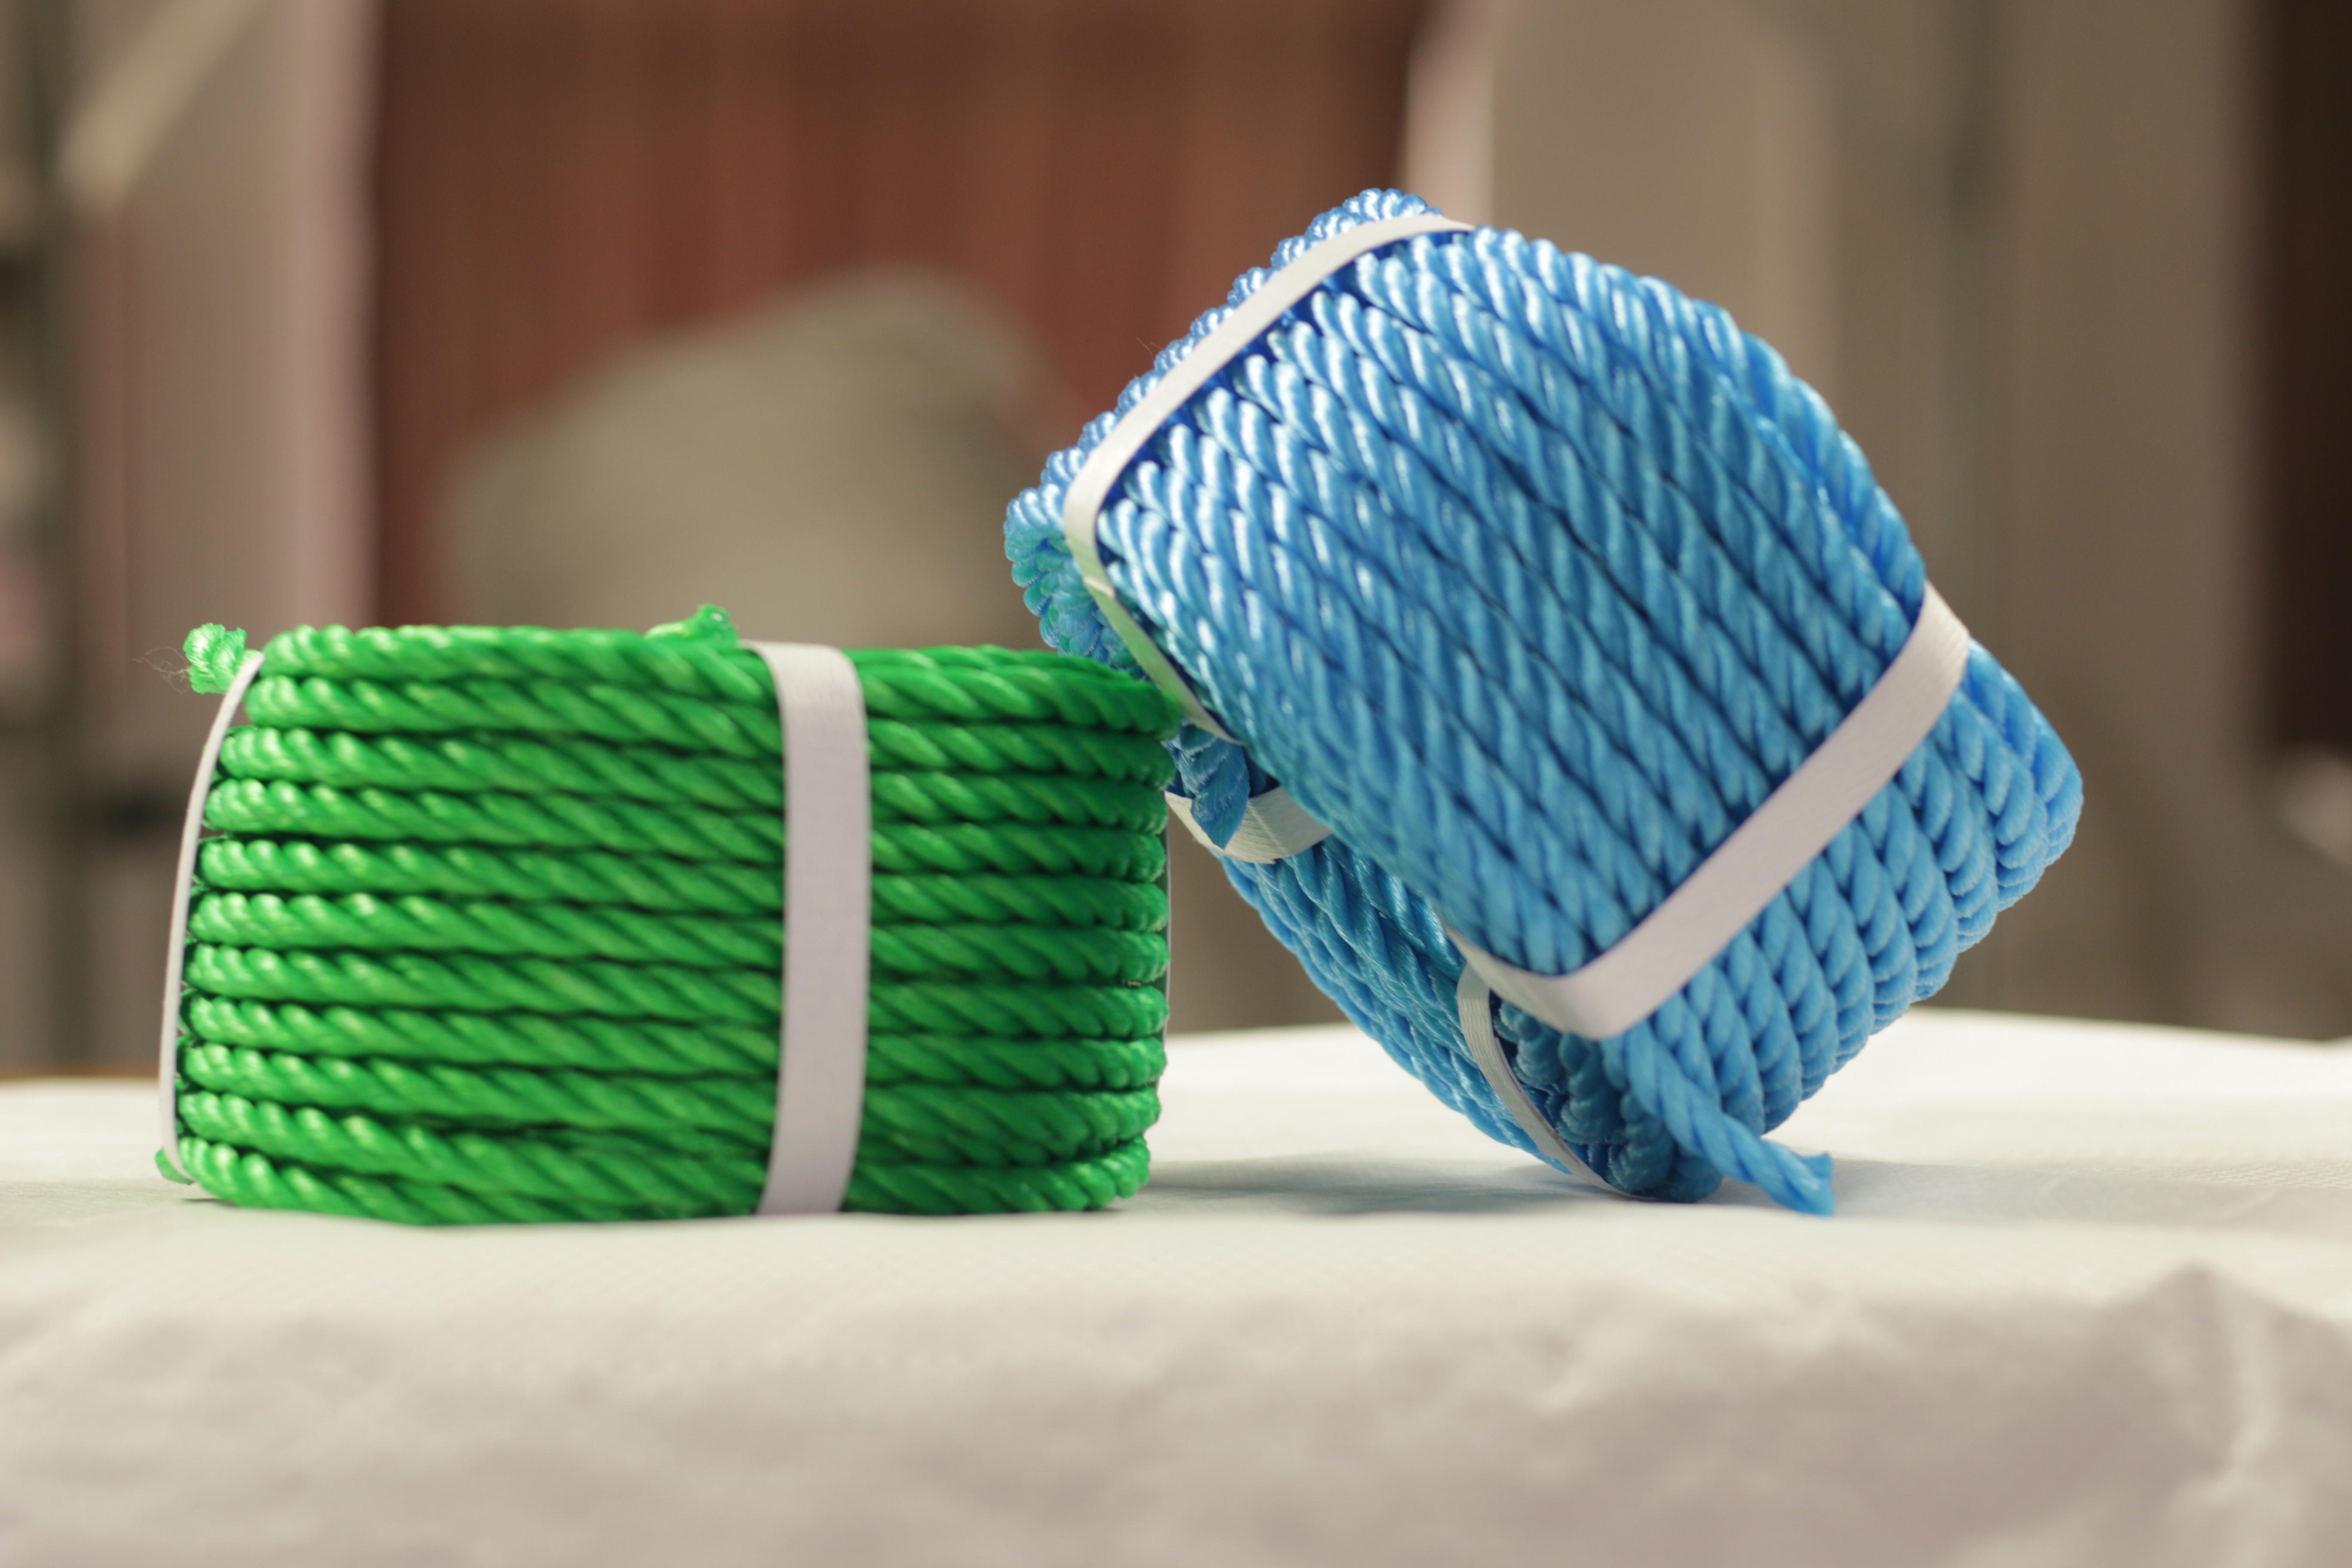 Polyethylene /PP rope used in daily life